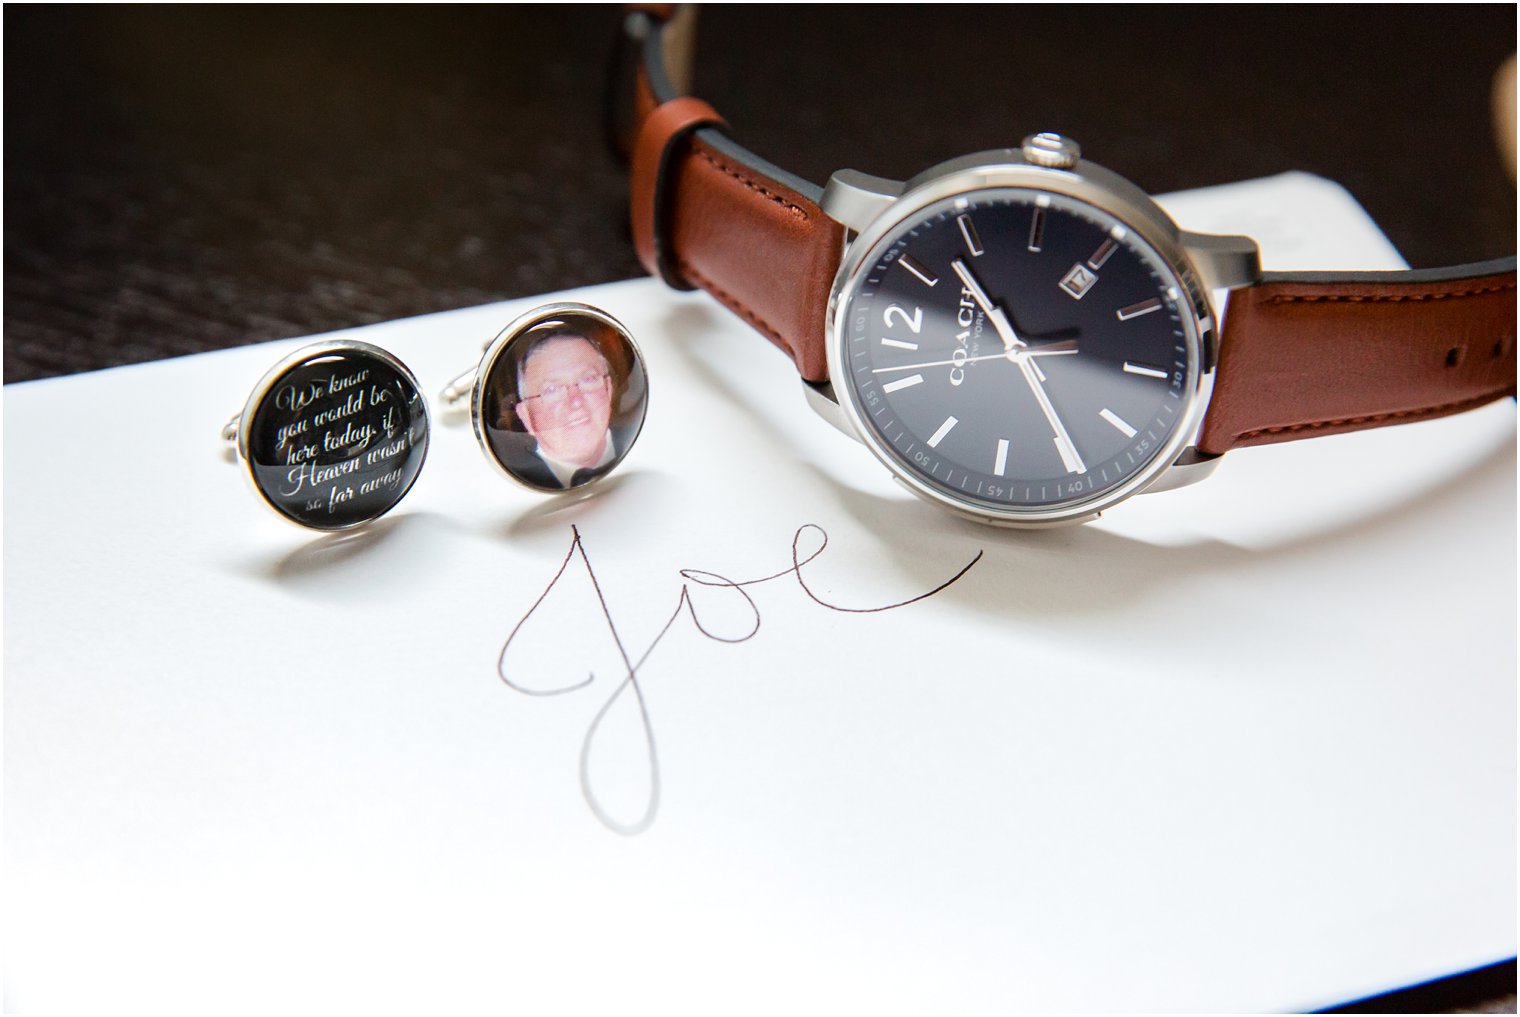 Gucci watch with special cufflinks for the groom